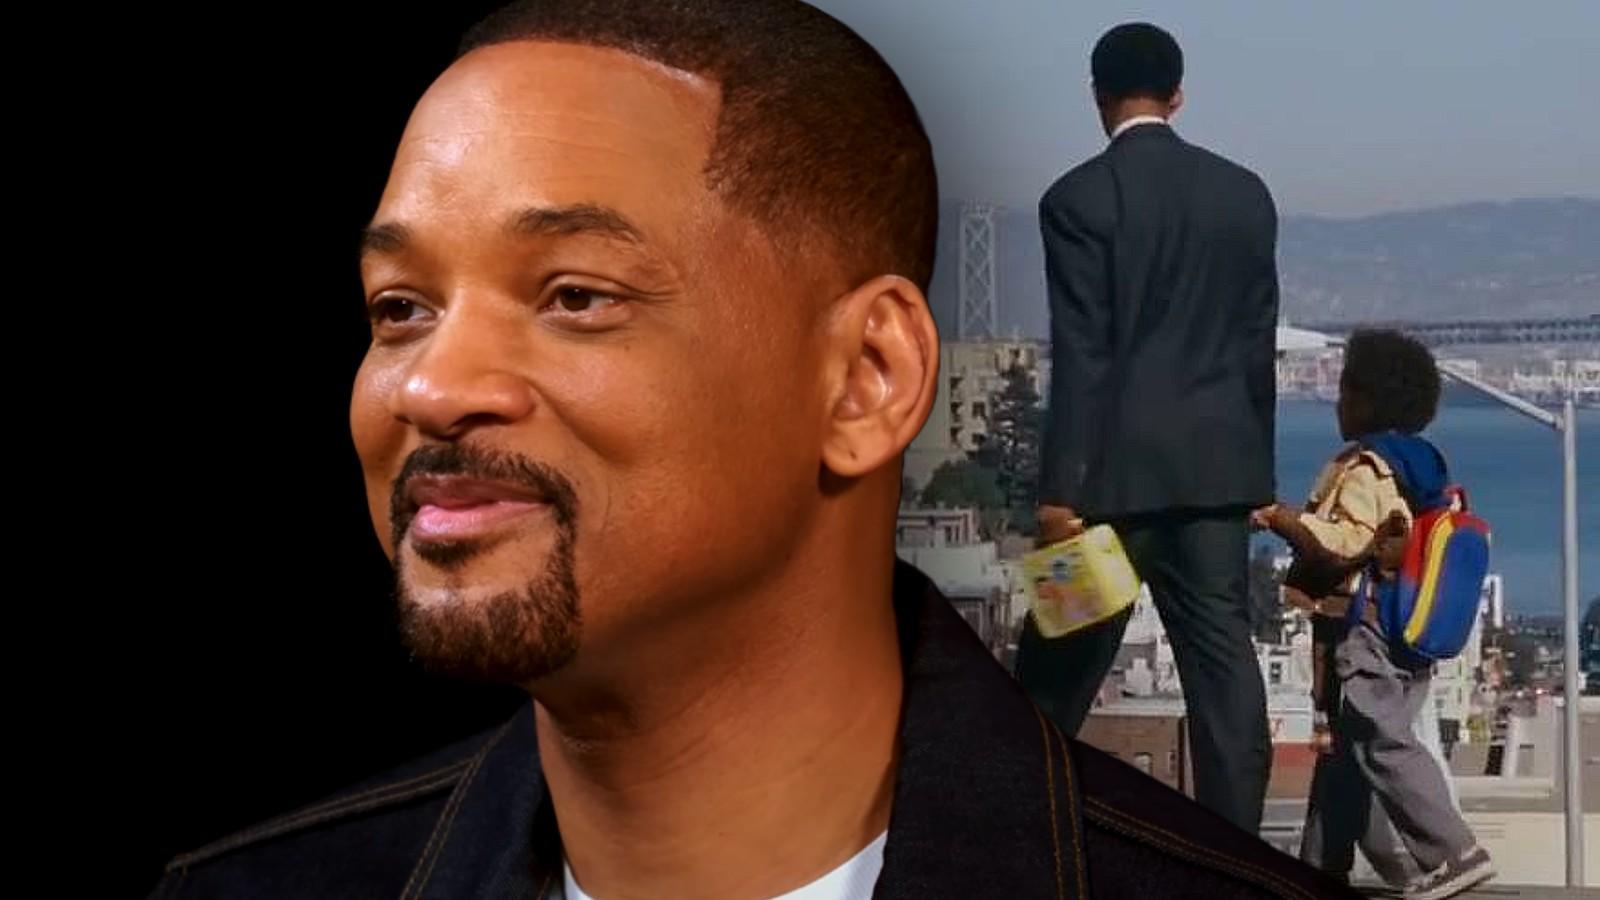 Will Smith on Hot Ones and in The Pursuit of Happyness